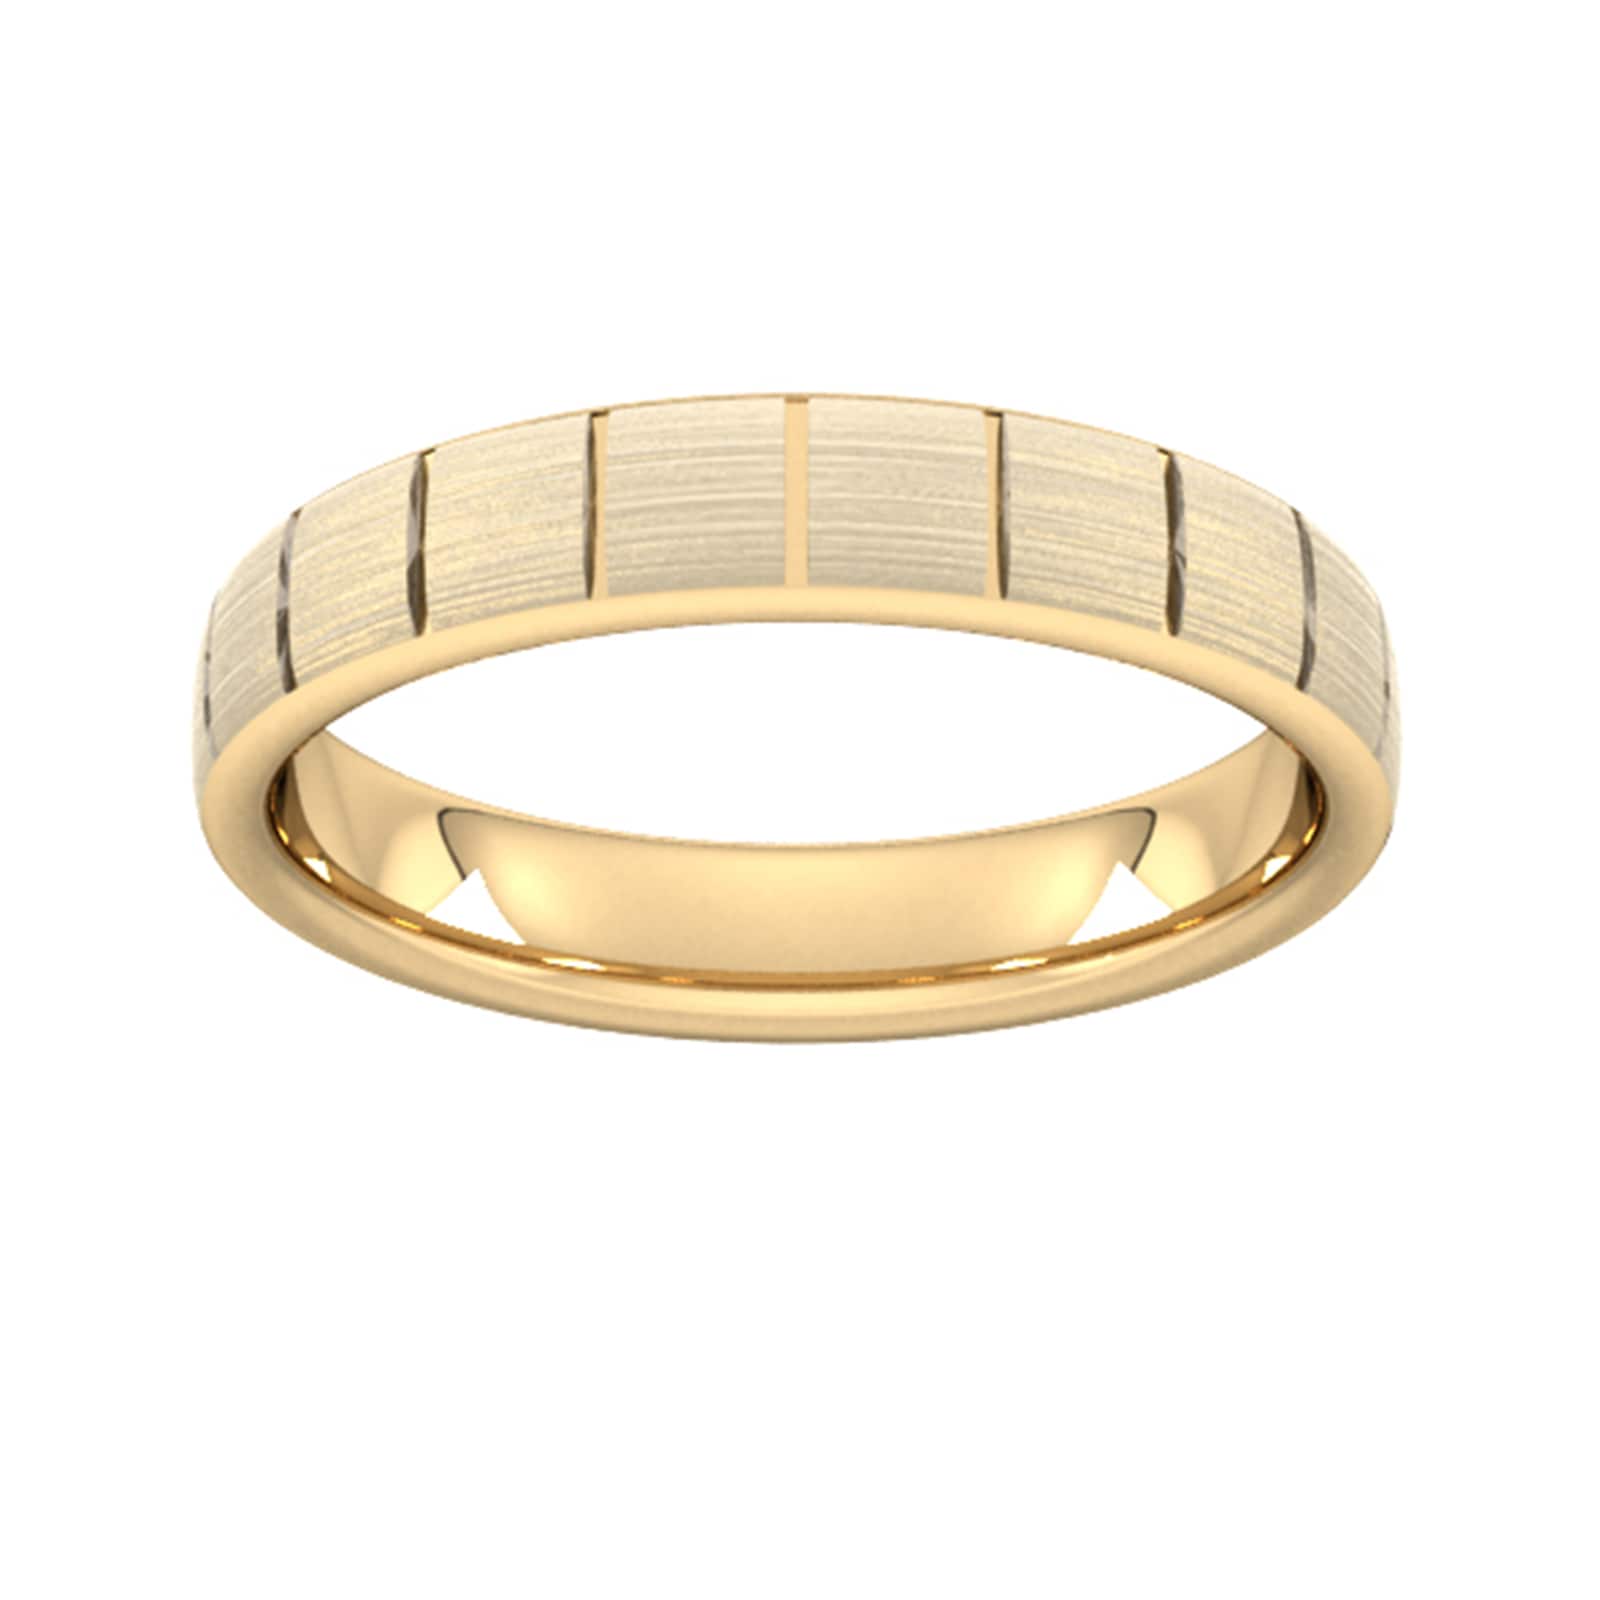 4mm Slight Court Standard Vertical Lines Wedding Ring In 18 Carat Yellow Gold - Ring Size N